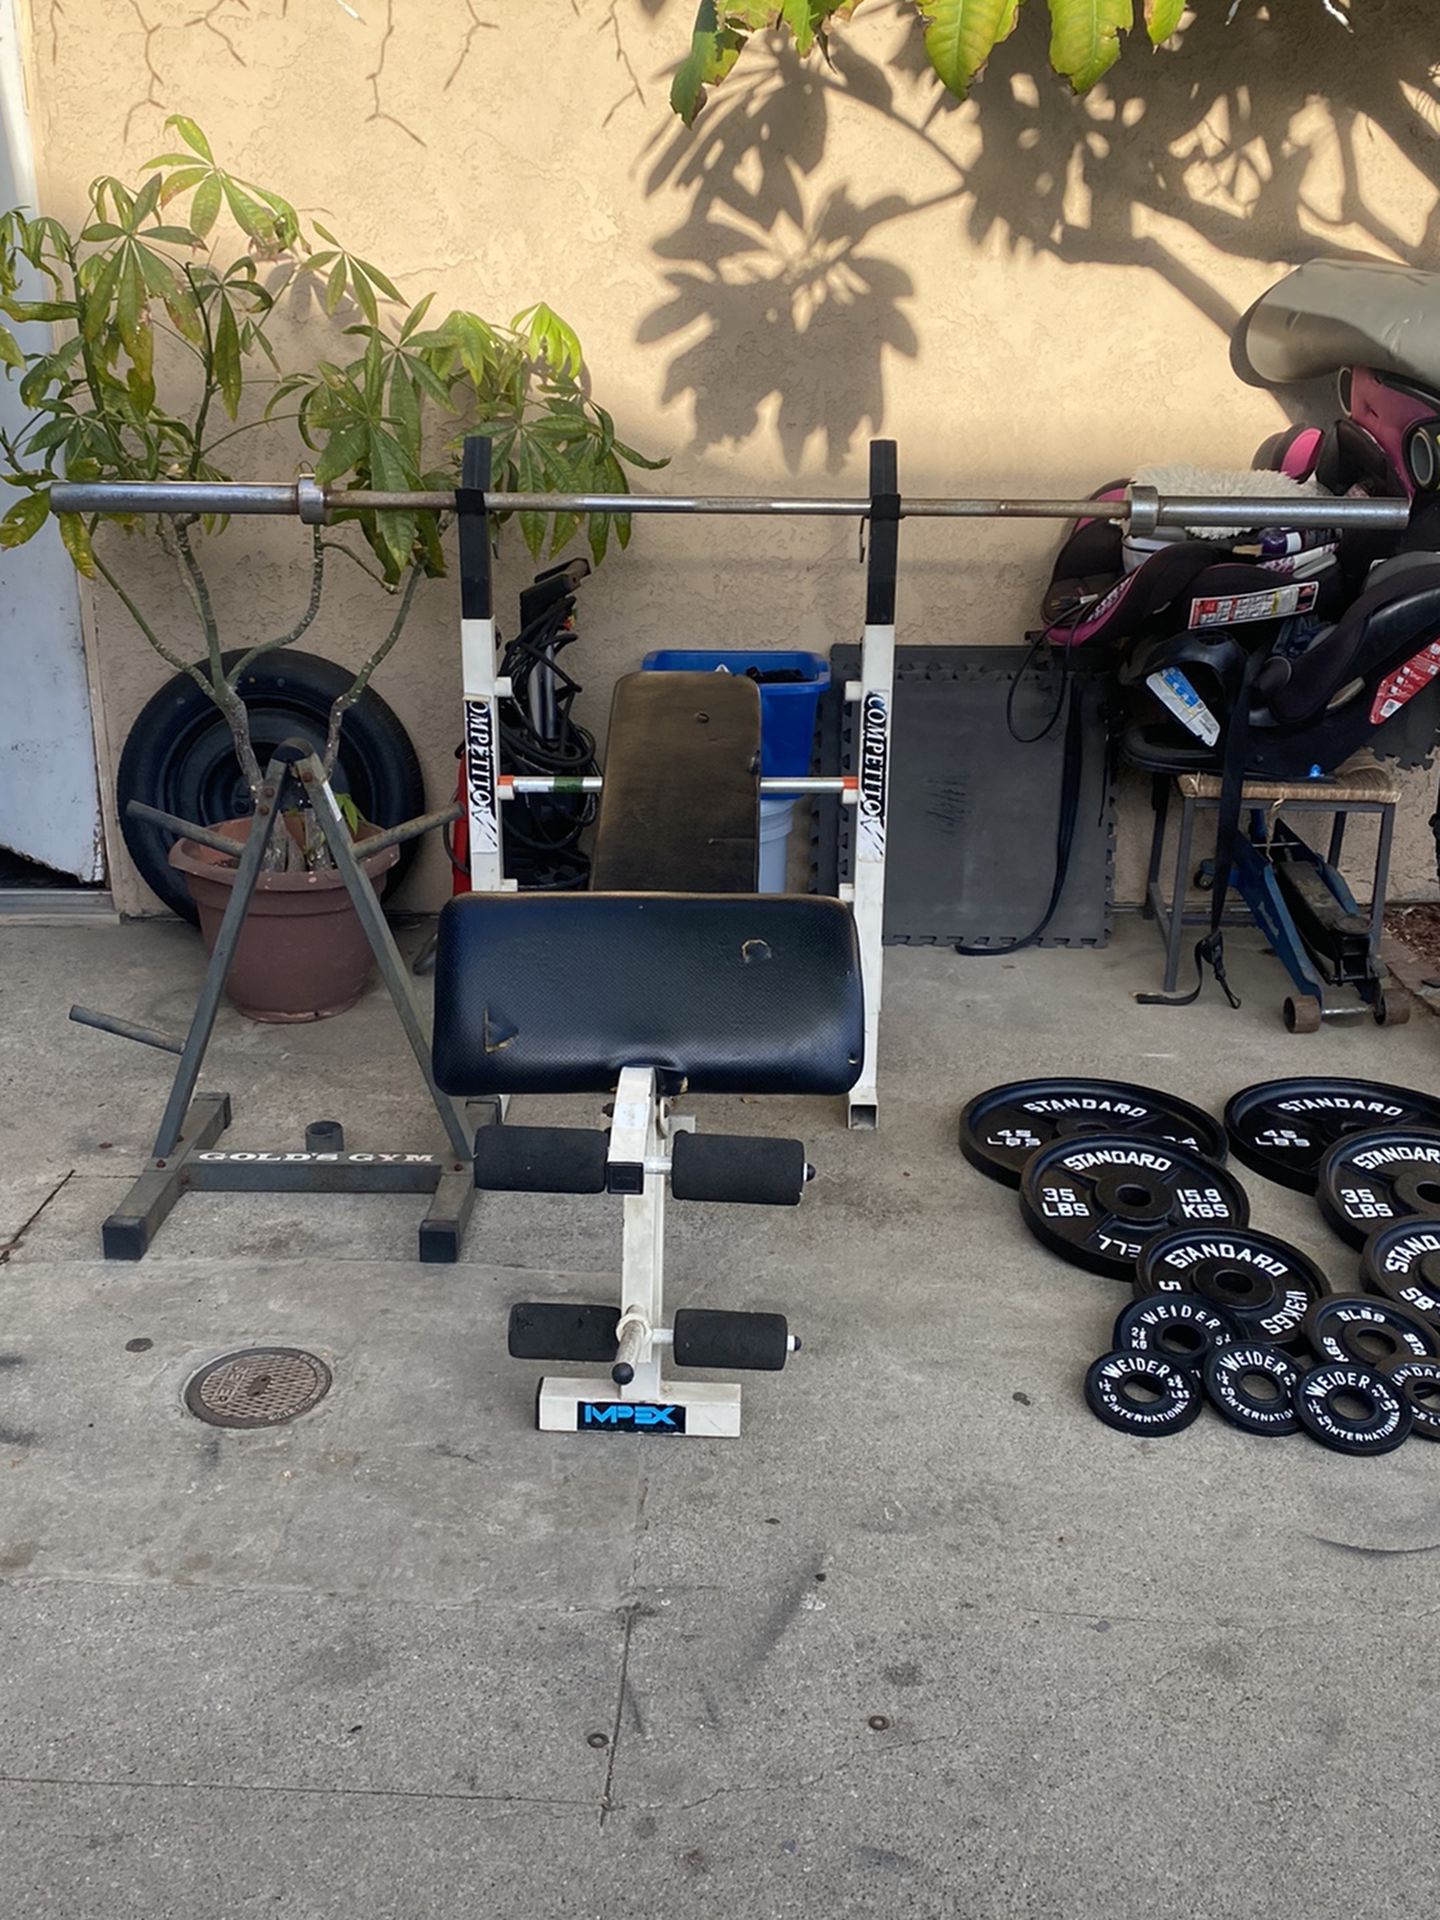 237 Pounds With 45 Ft Bar And Bench Press And Weight Tree (Read Description )